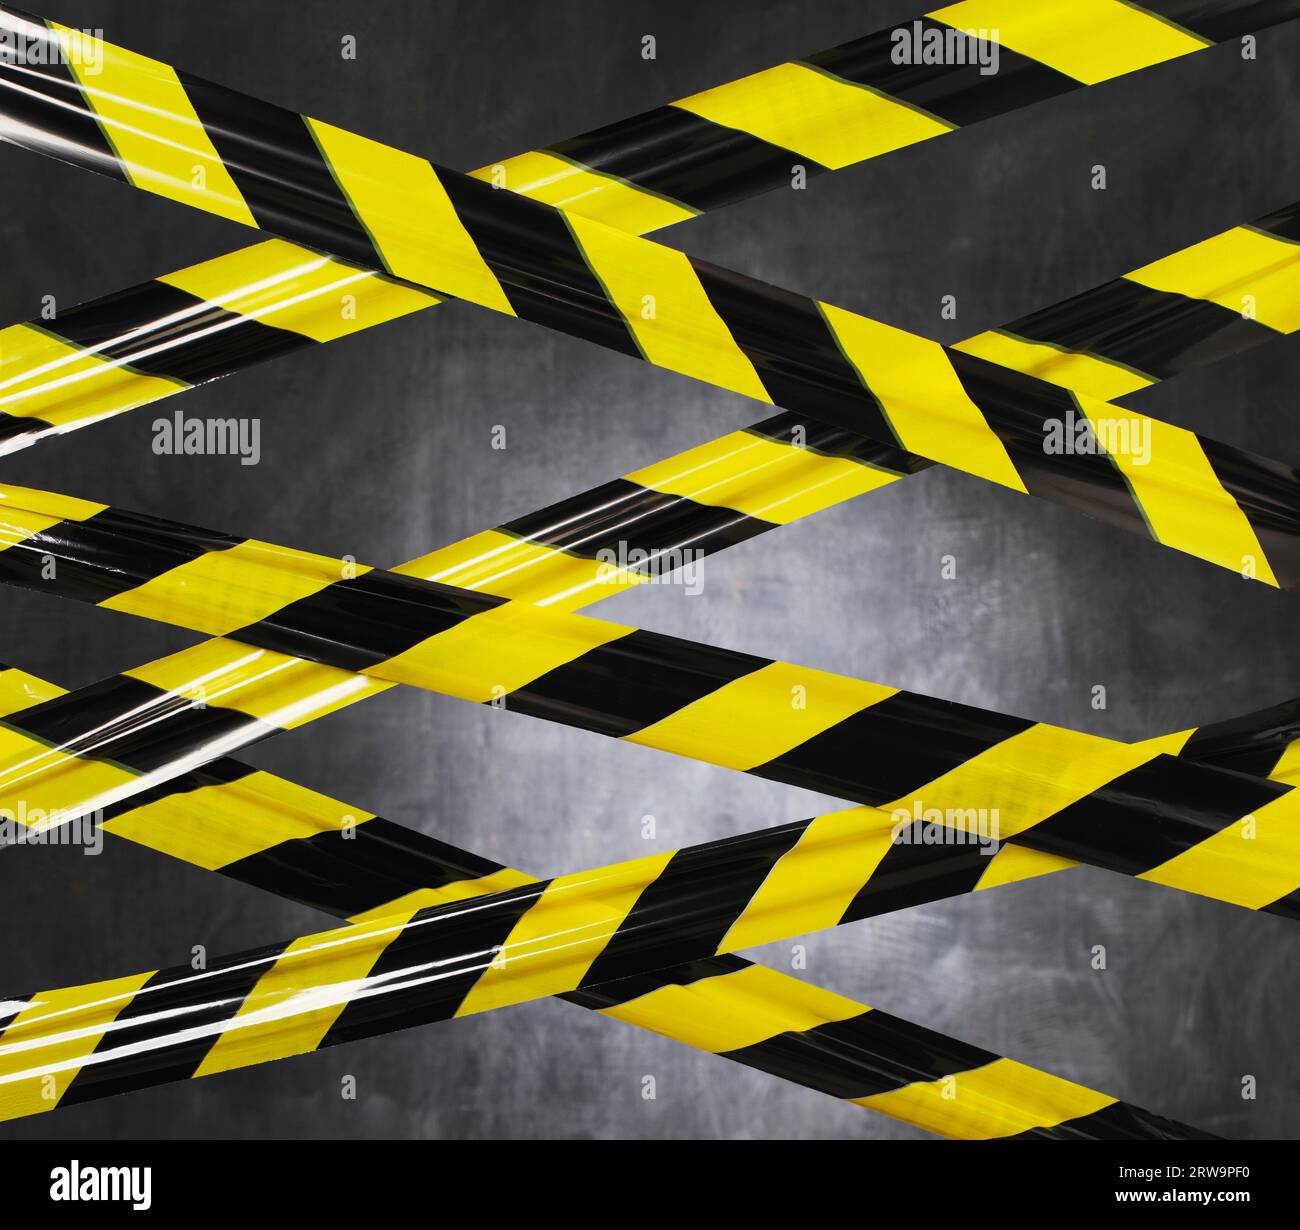 Black and yellow plastic barrier tape blocking the way Stock Photo